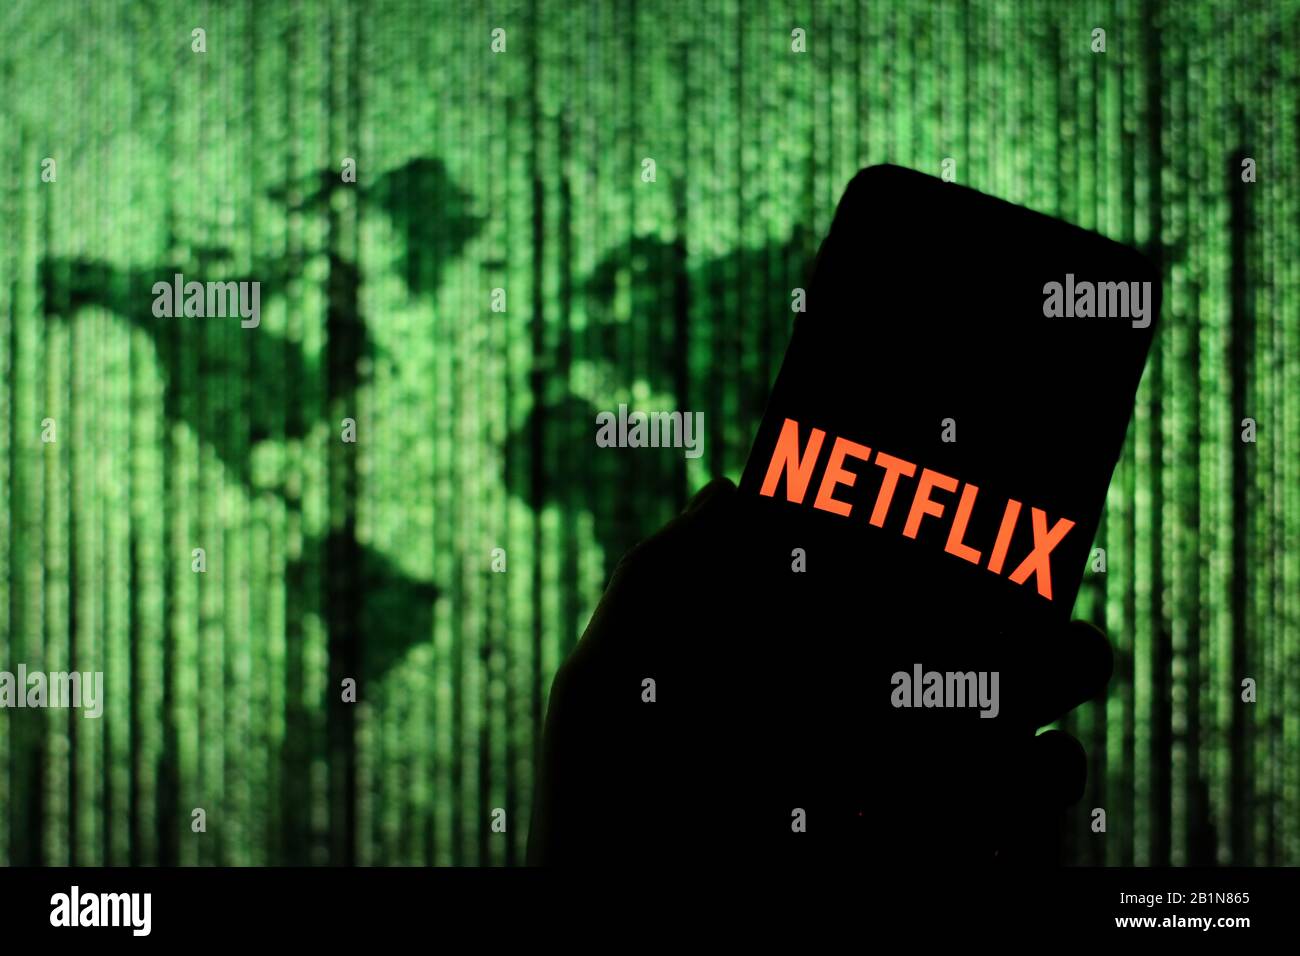 Netflix logo seen displayed on smart phone screen with Matrix-like world map visible blurred in the background Stock Photo